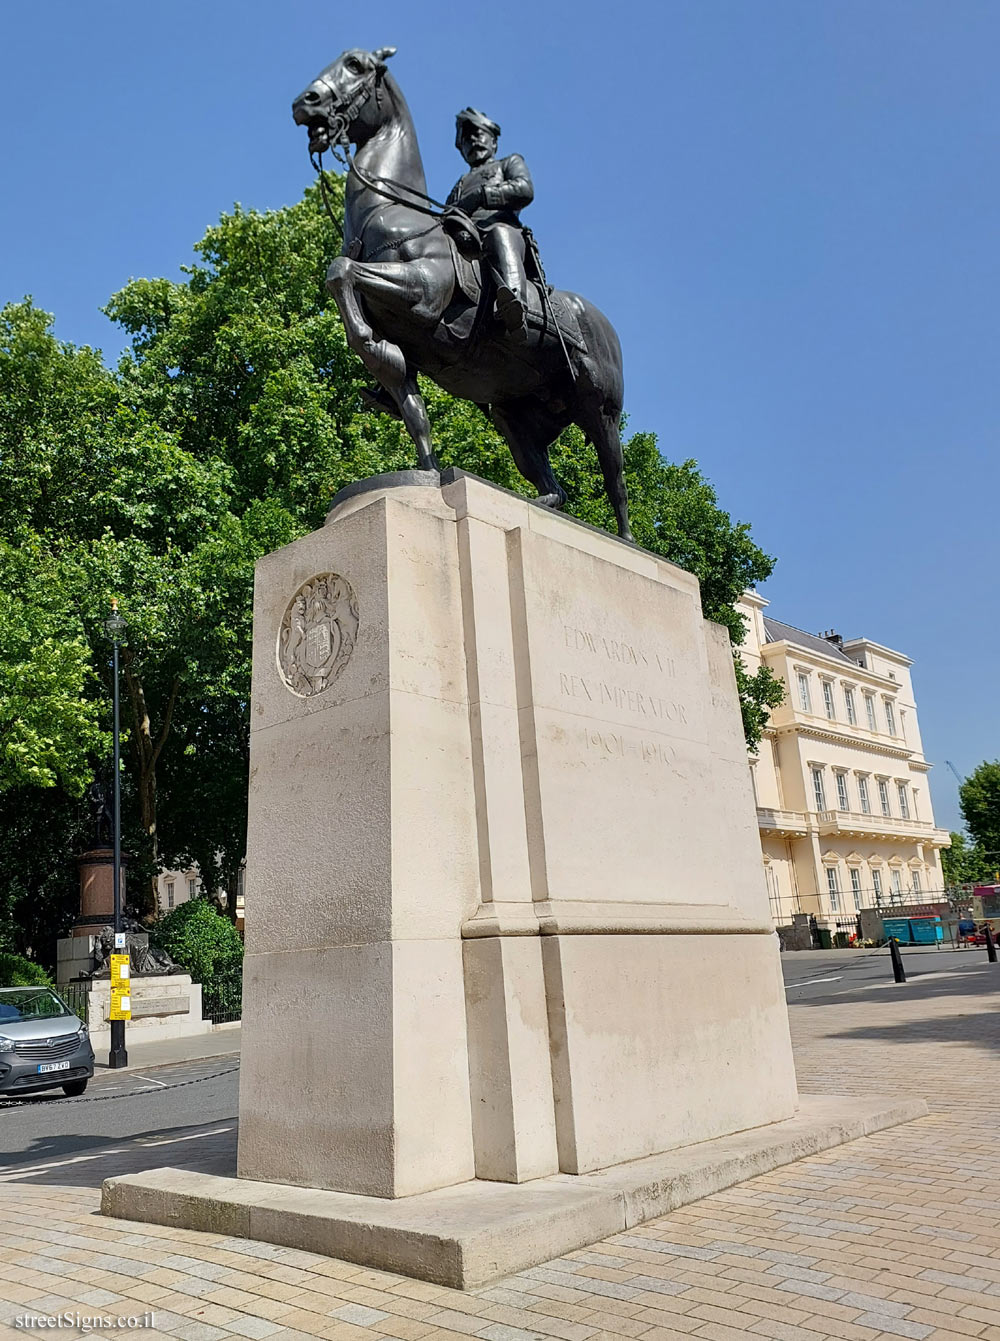 London - Statue of King Edward VII riding a horse - 107 Pall Mall, St. James’s, London SW1Y 5ER, UK